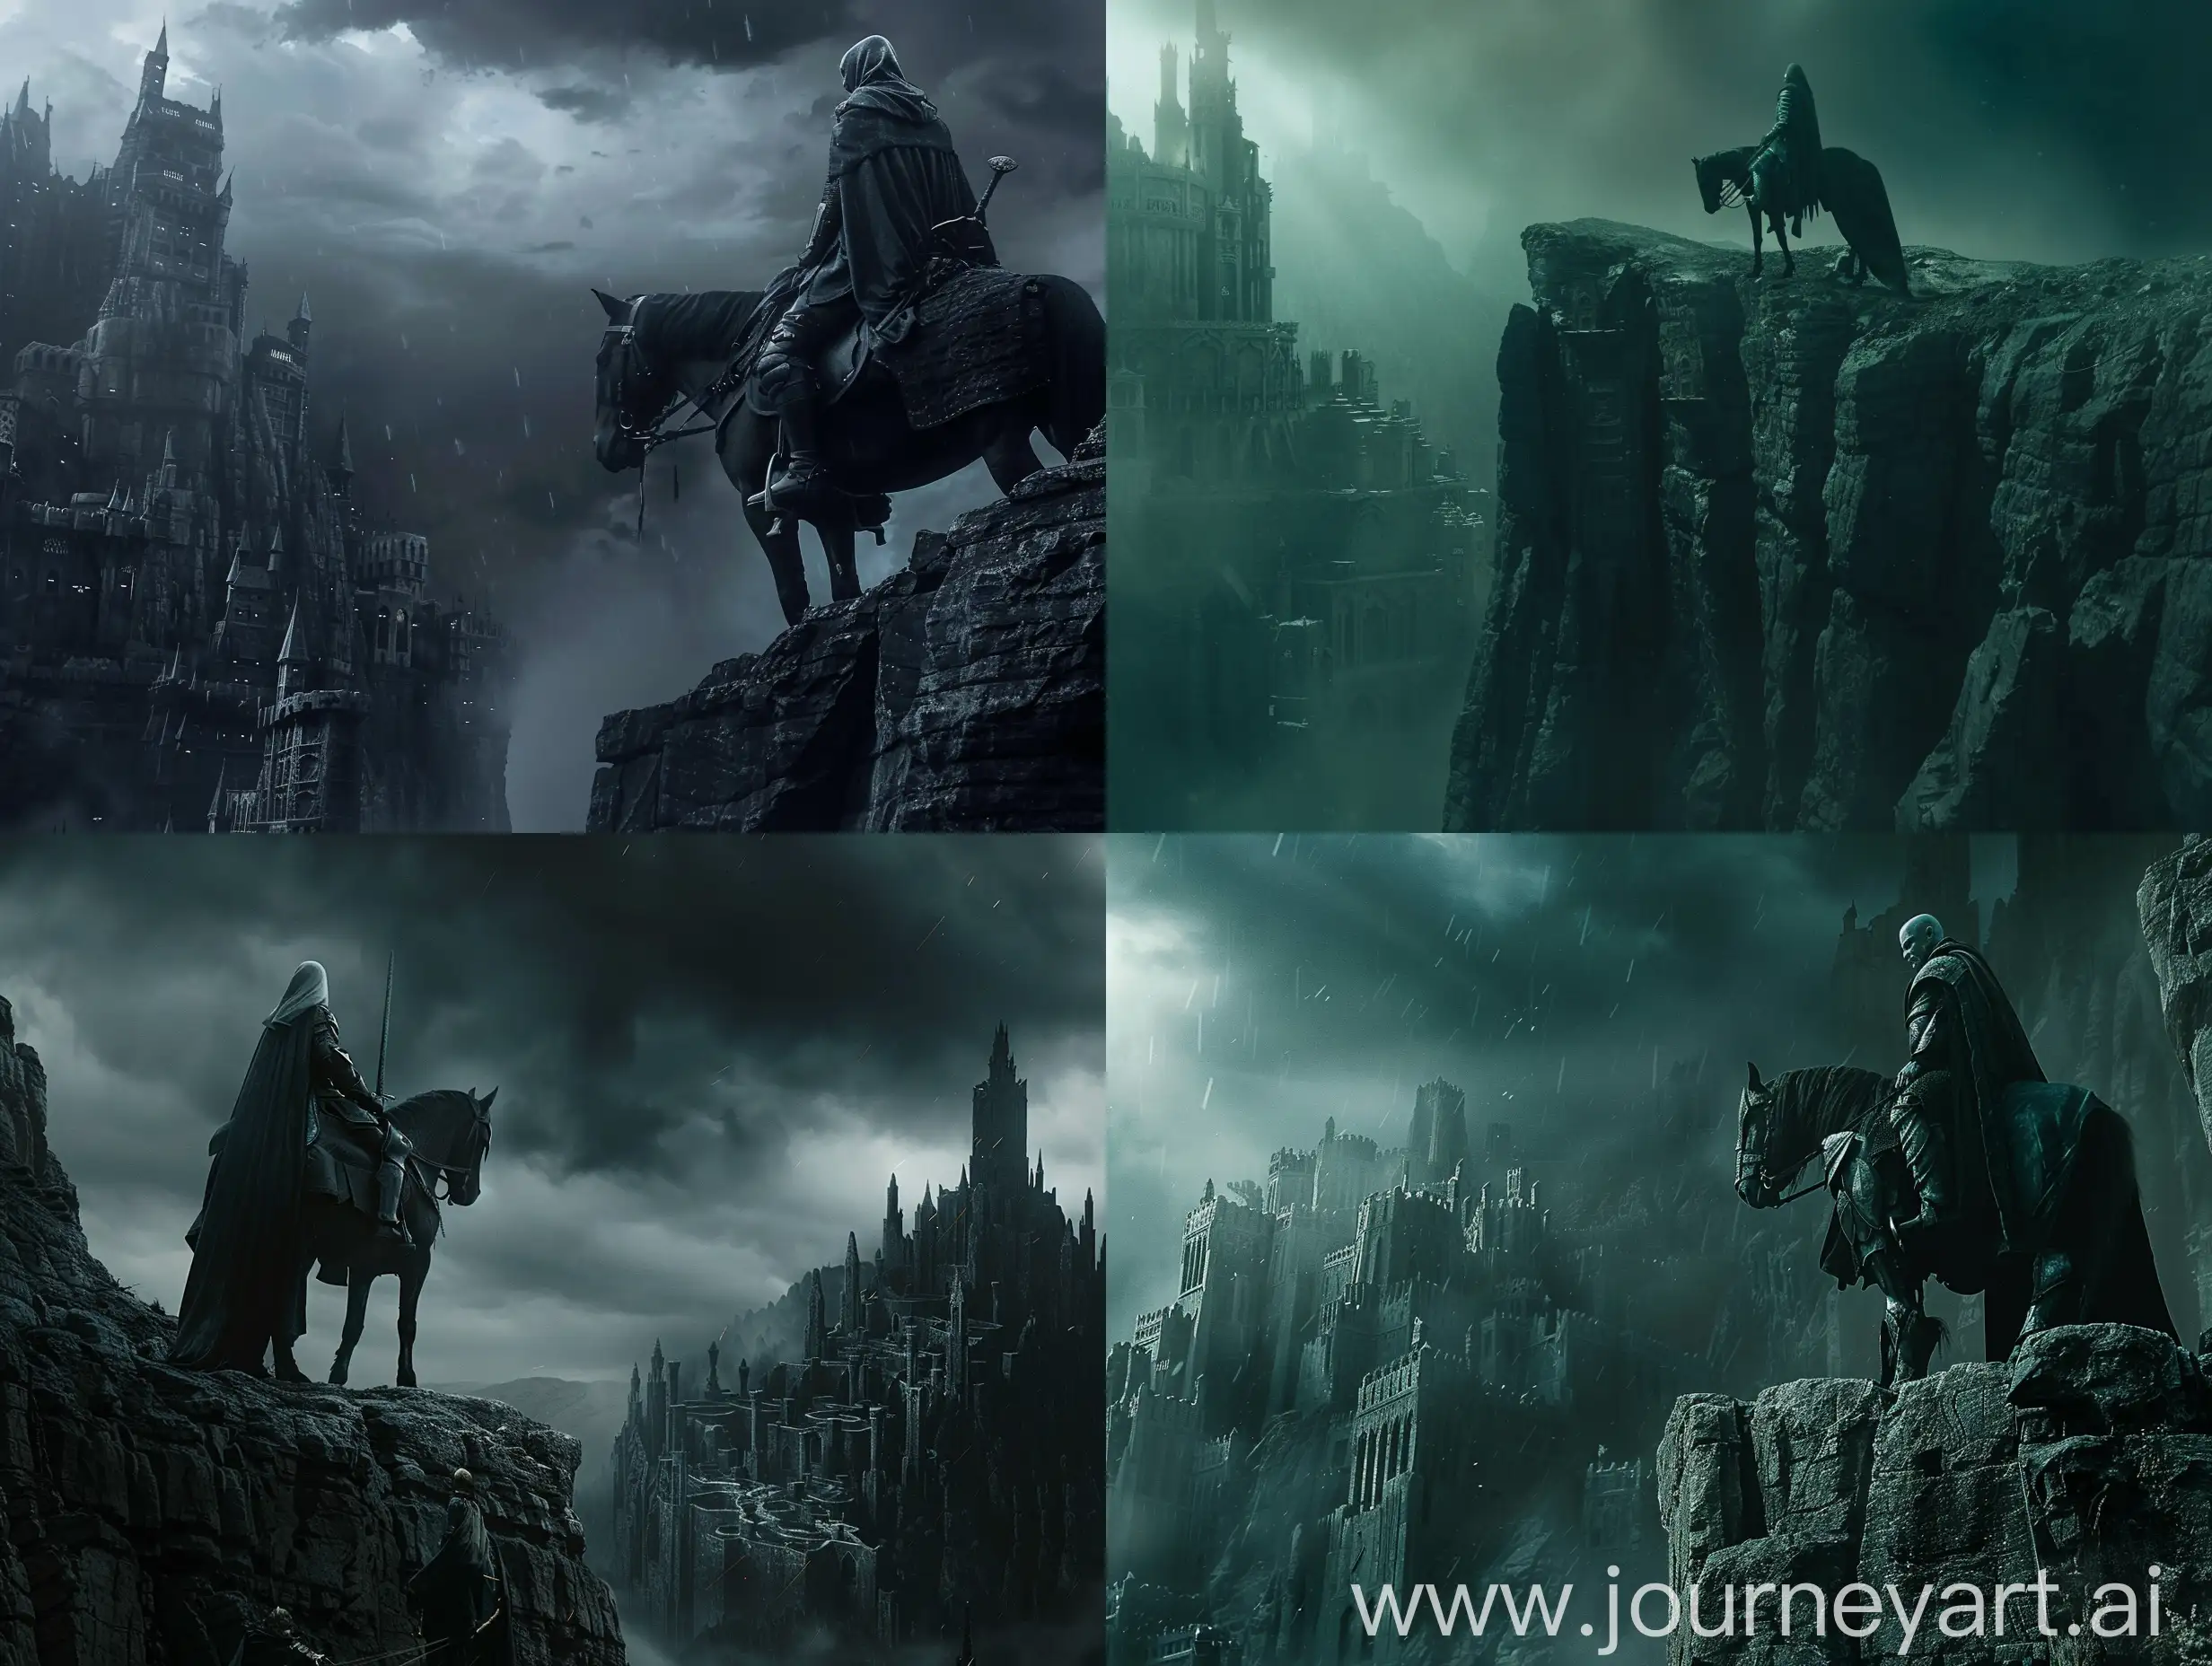 low angle cinematic still of nazgul faceless lord, standing top of an armoured horse, in the edge of a tall cliff, looking down at a huge city with dark towers, epic, dark, dramatic, cinematic lighting, mystery